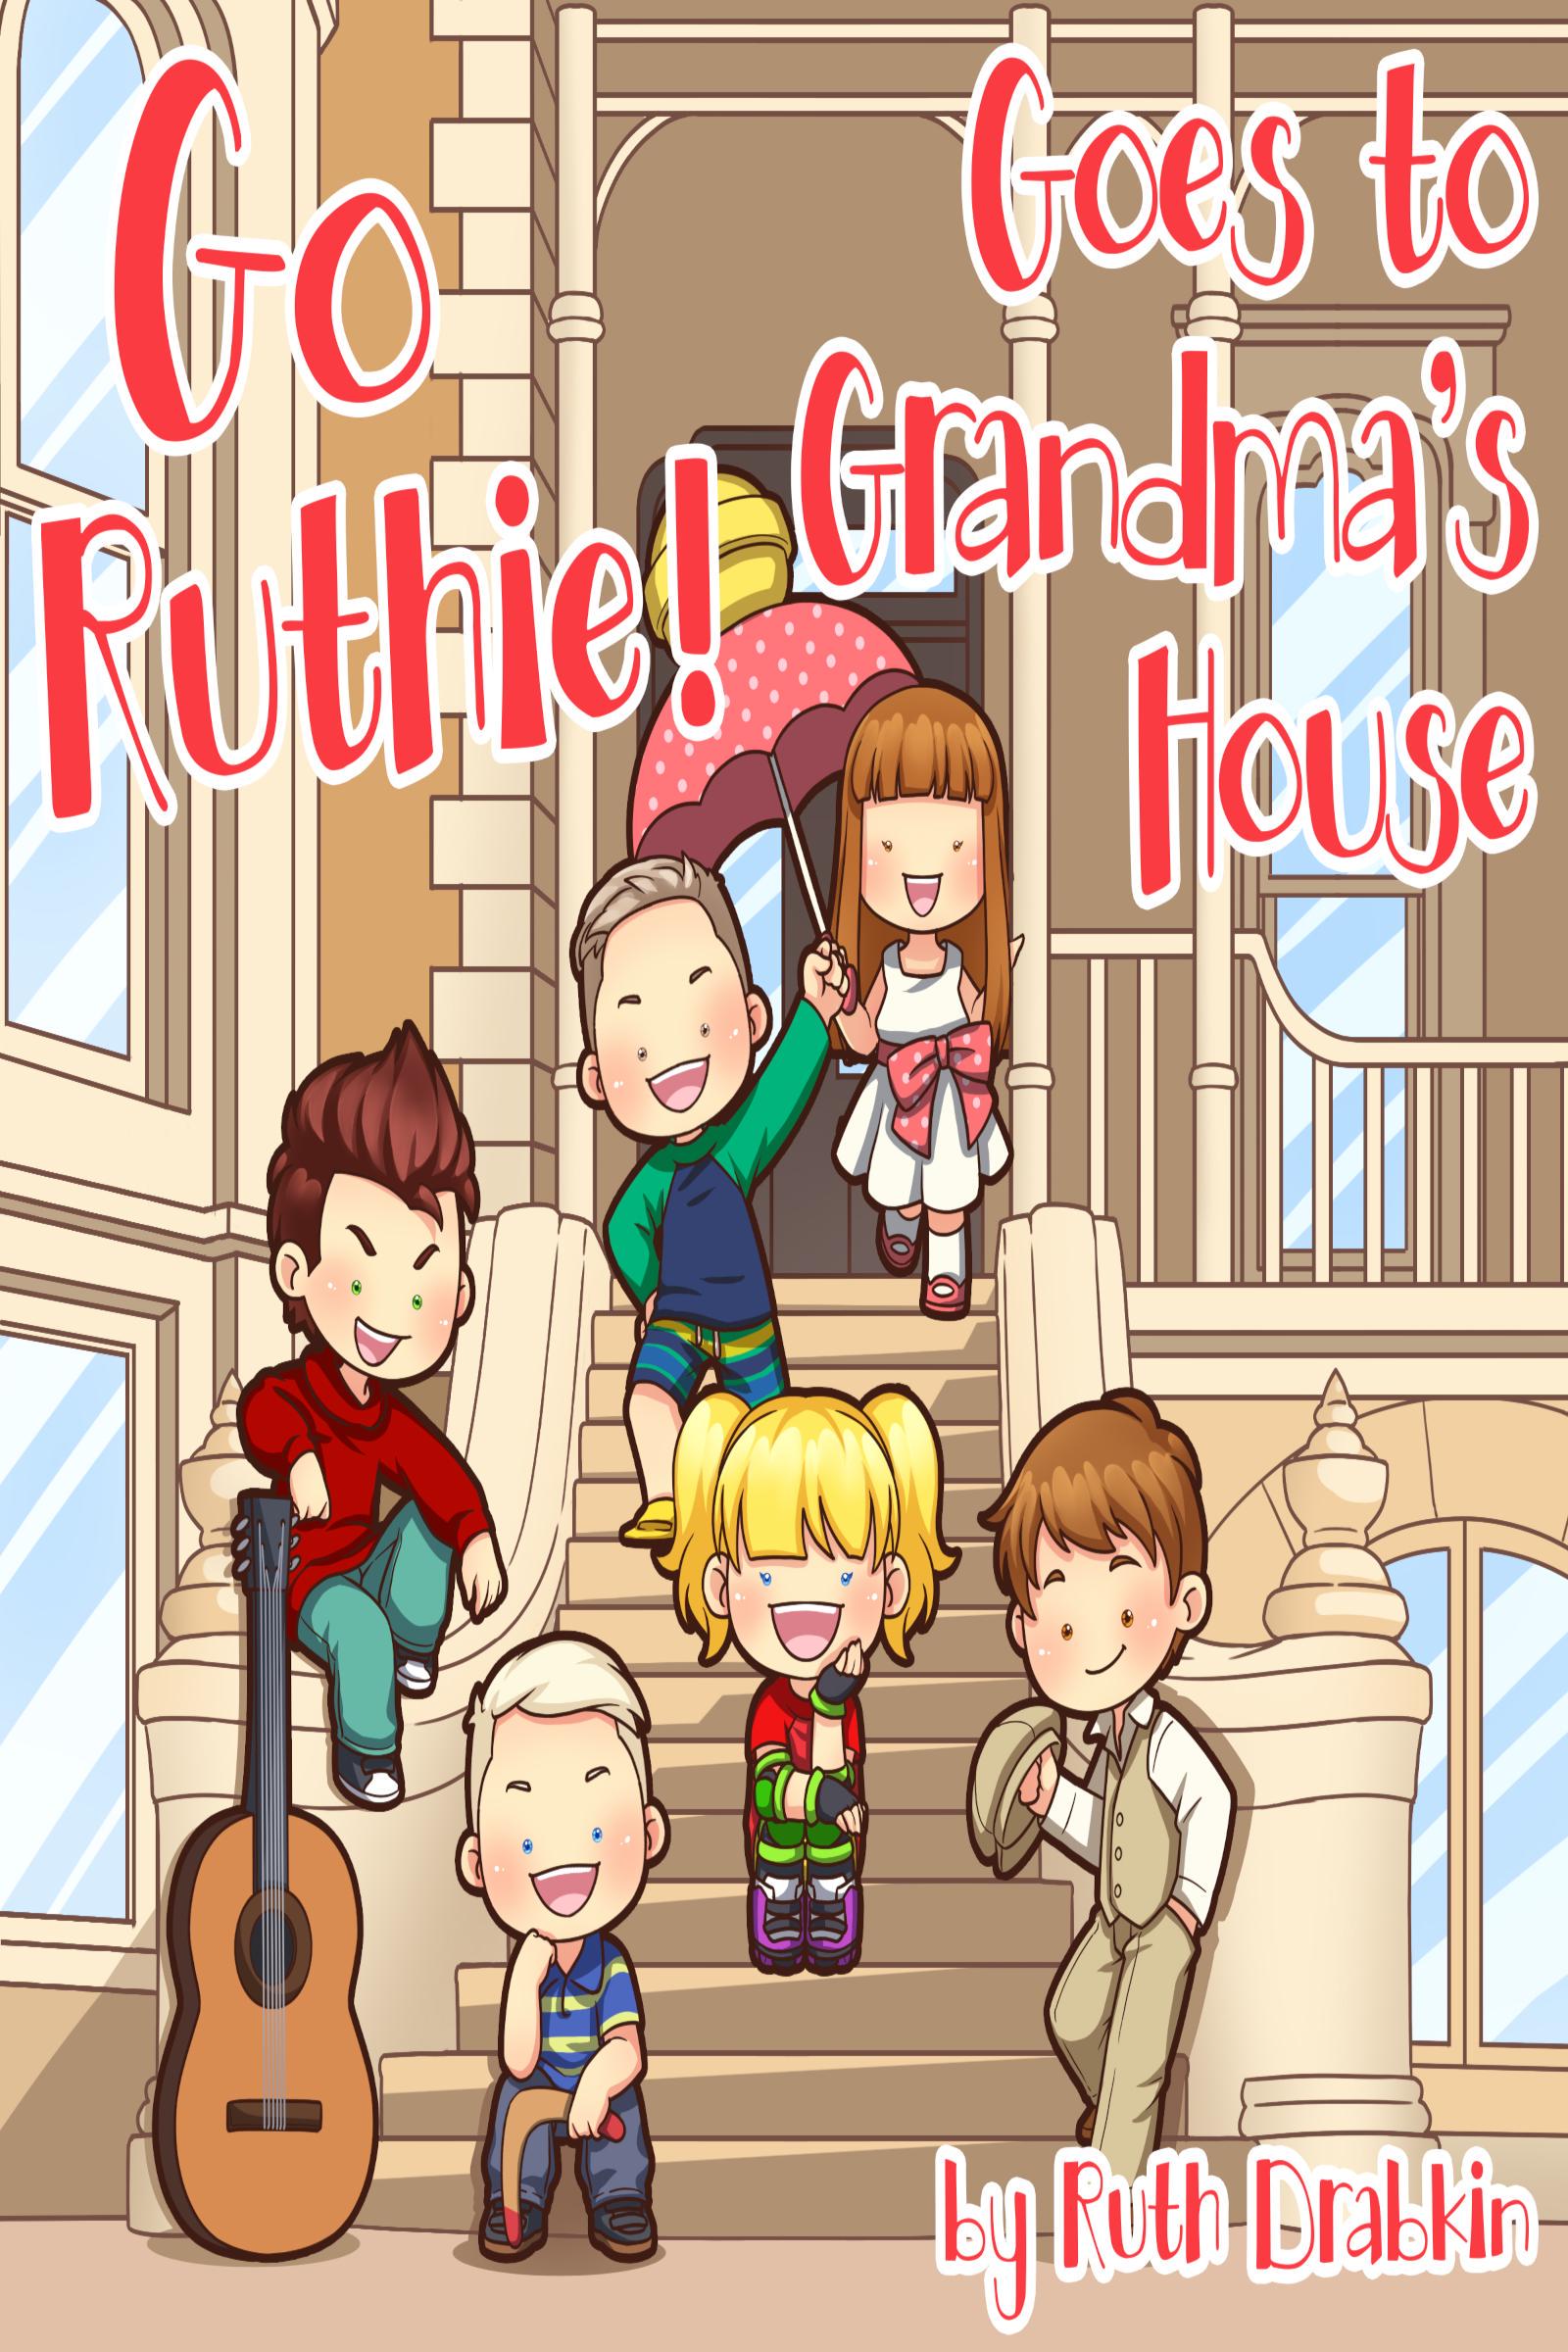 Smashwords – Go Ruthie Goes to Grandma's House – a book by Ruth Drabkin